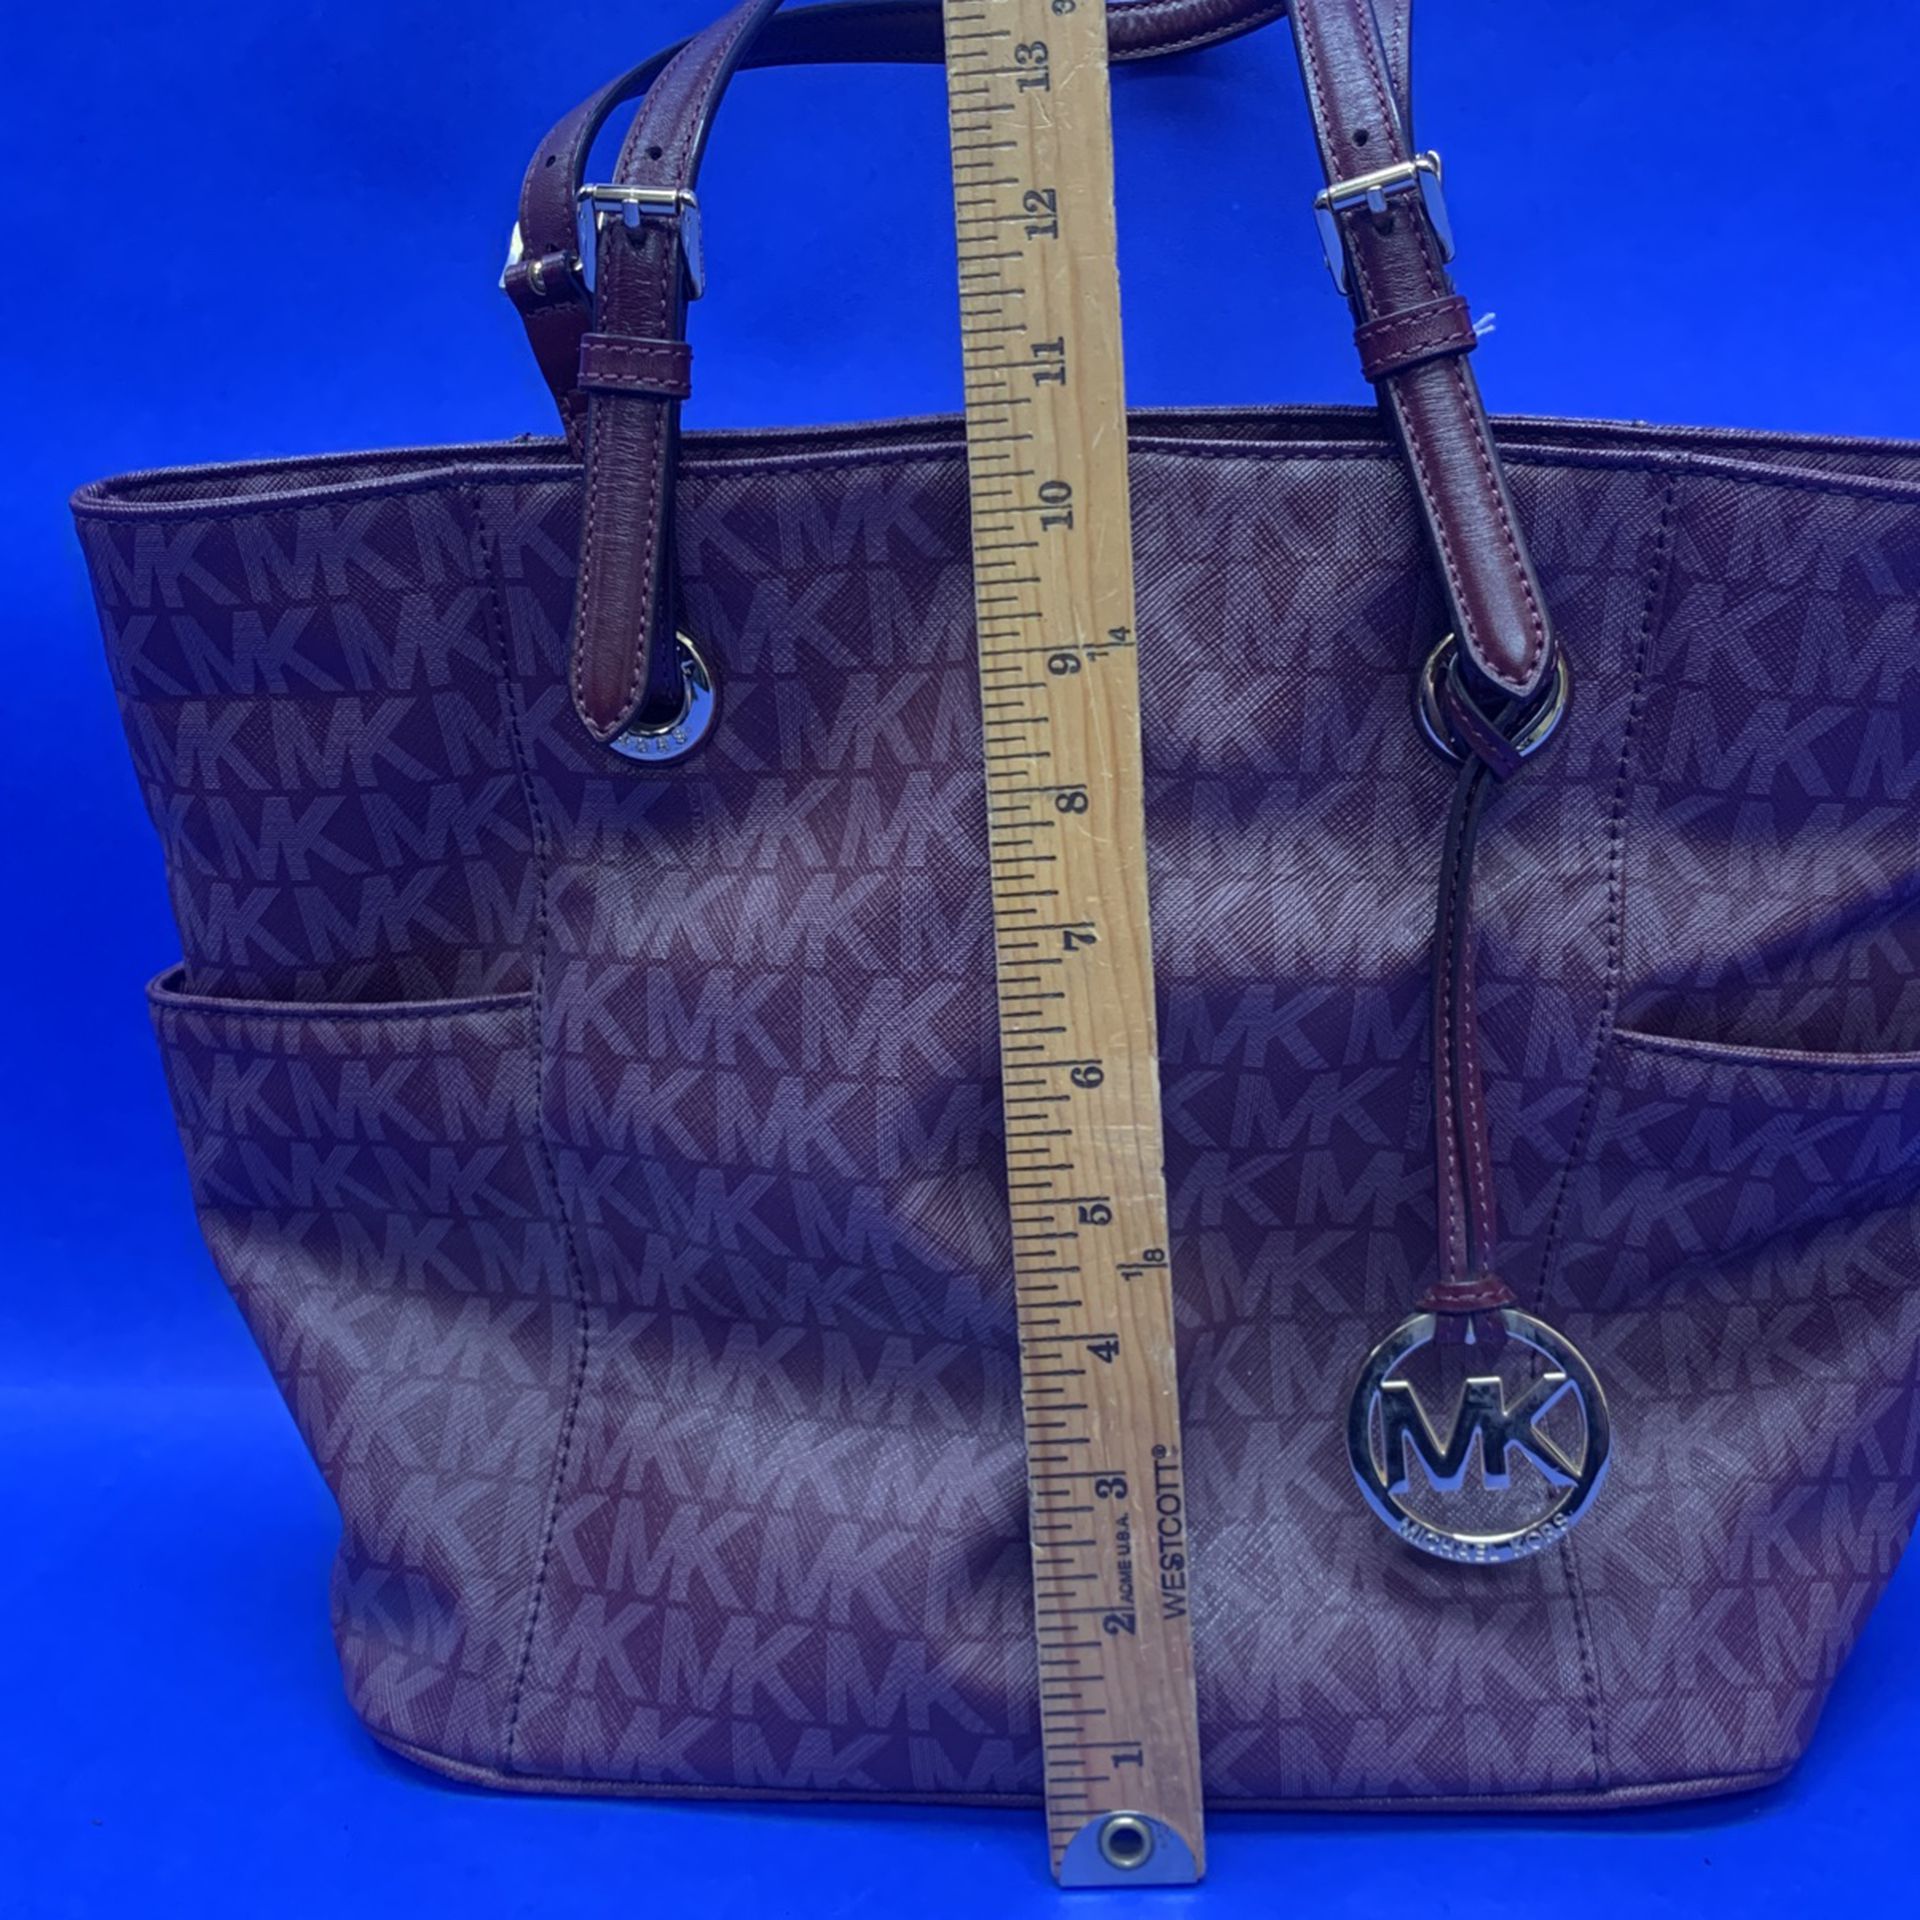 Michael Kors Jodie Small Logo Jacquard Tote Bag for Sale in Chula Vista, CA  - OfferUp